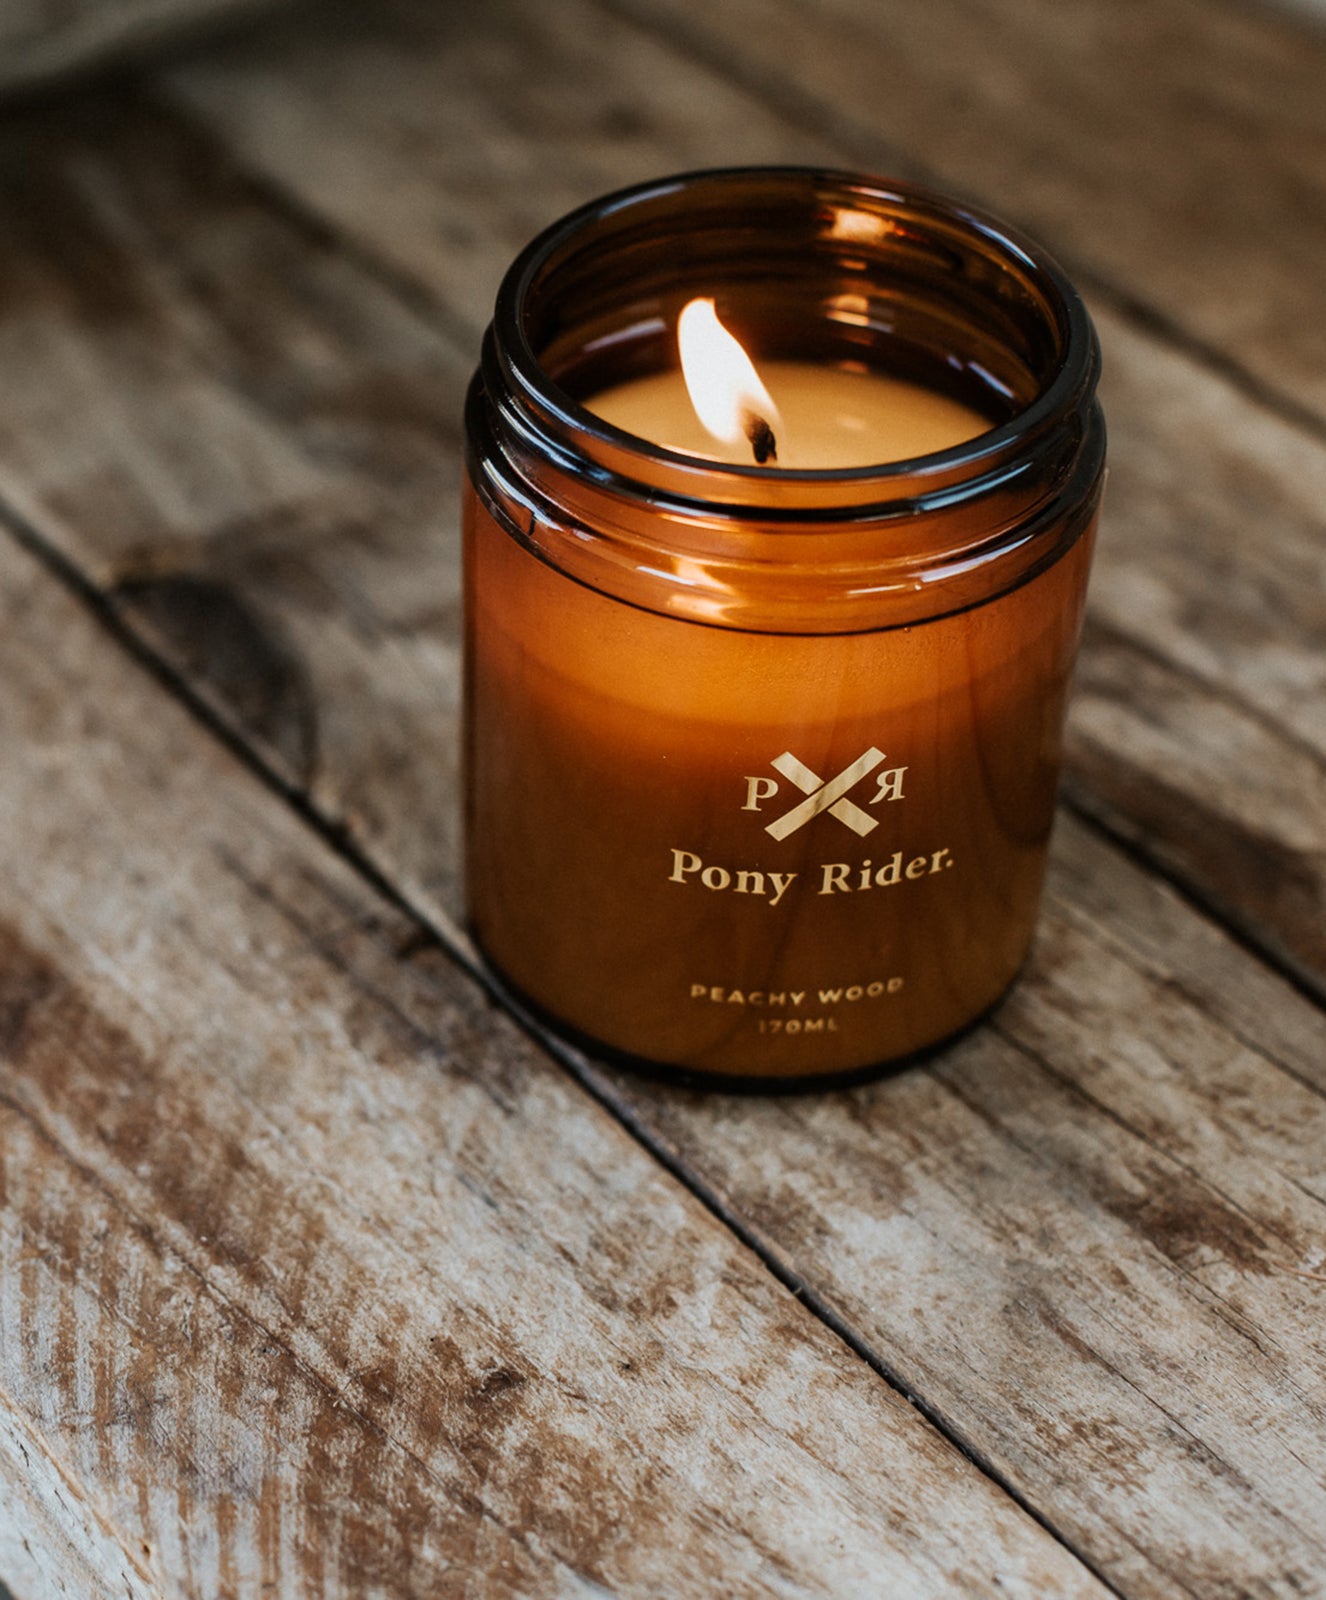 Pony Rider Candle | Peachy Wood